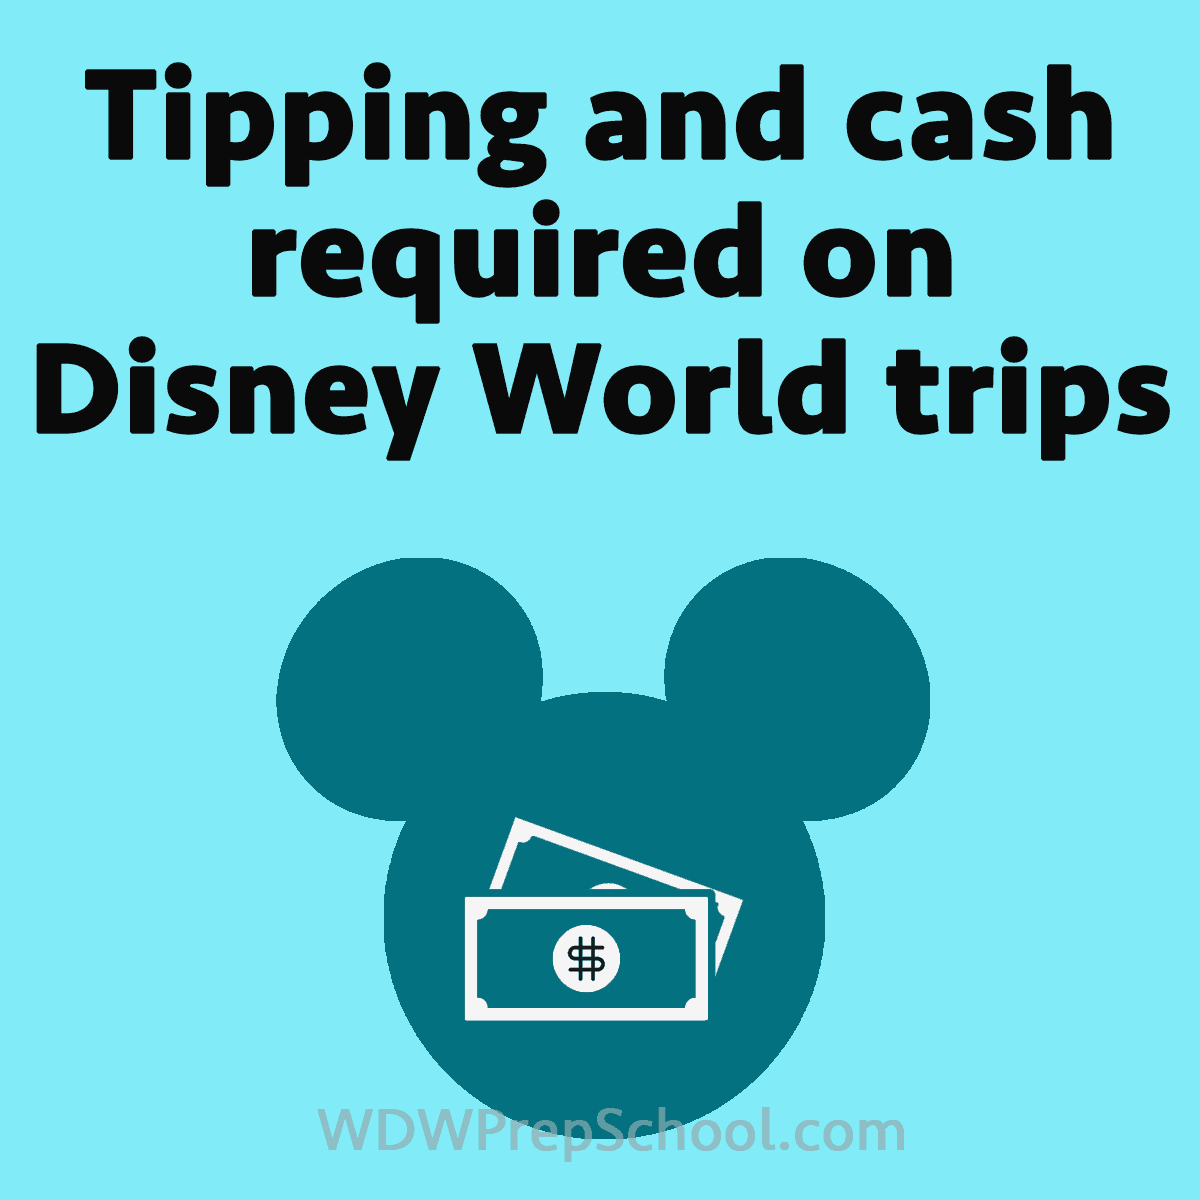 Tipping and cash needed on Disney World trips – PREP096